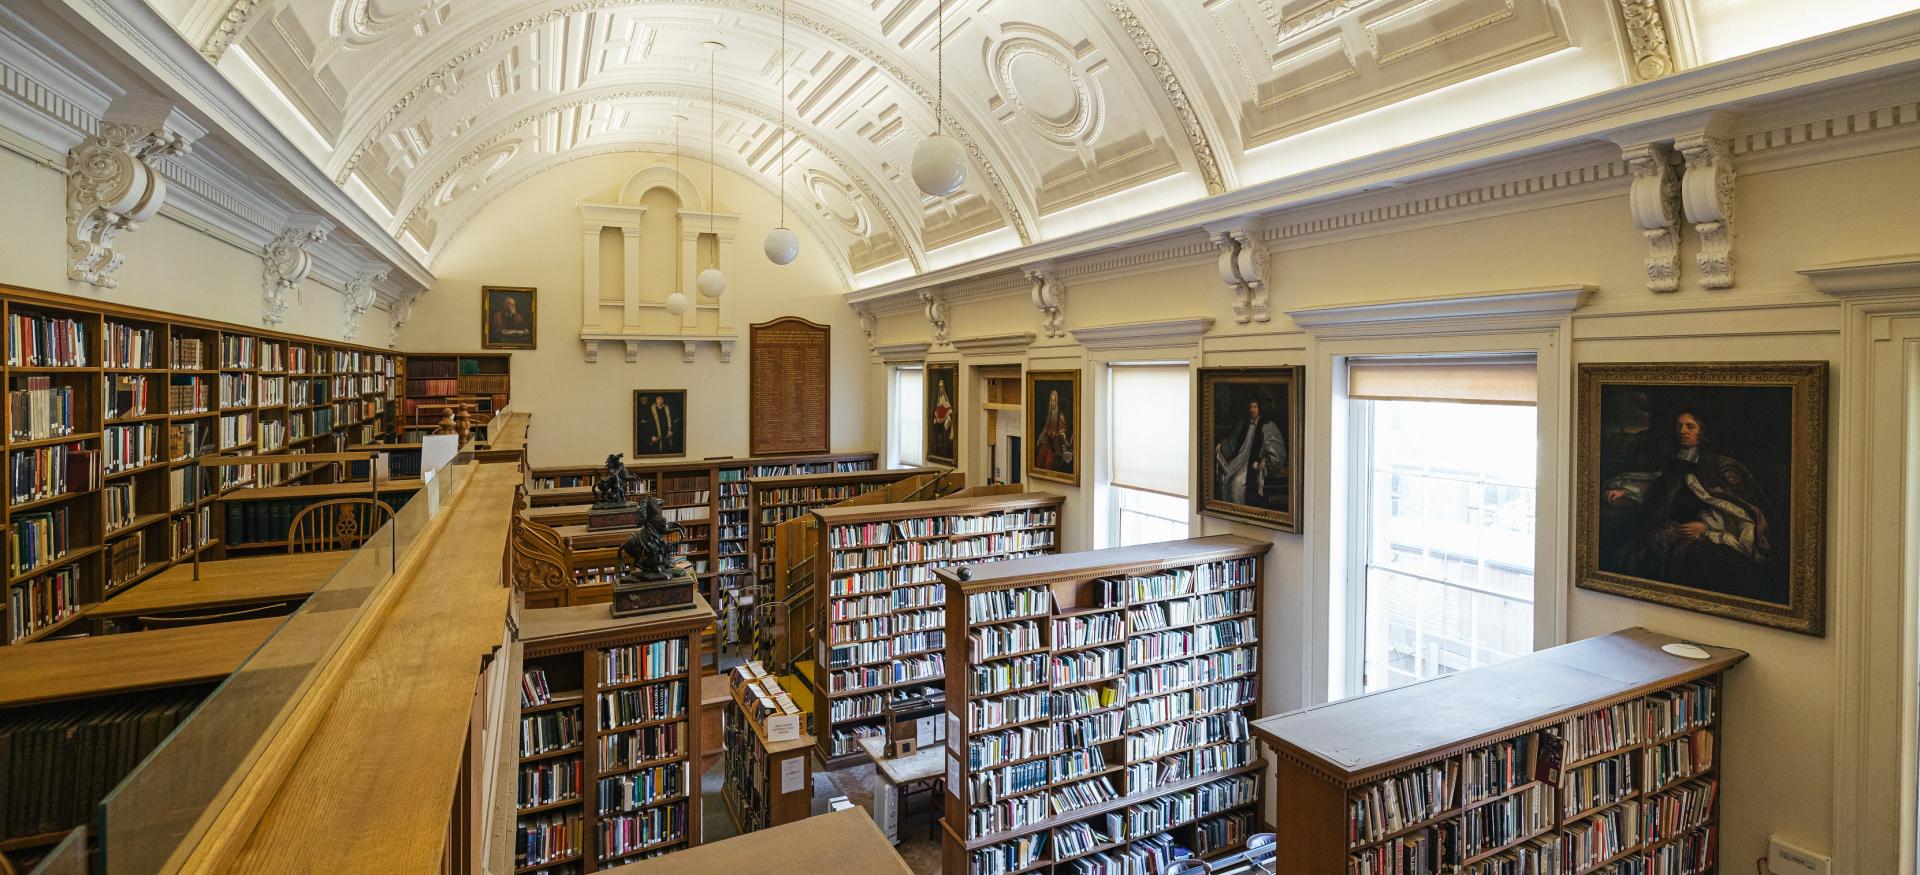 A view inside Trinity's War Memorial Library from the upstairs gallery.